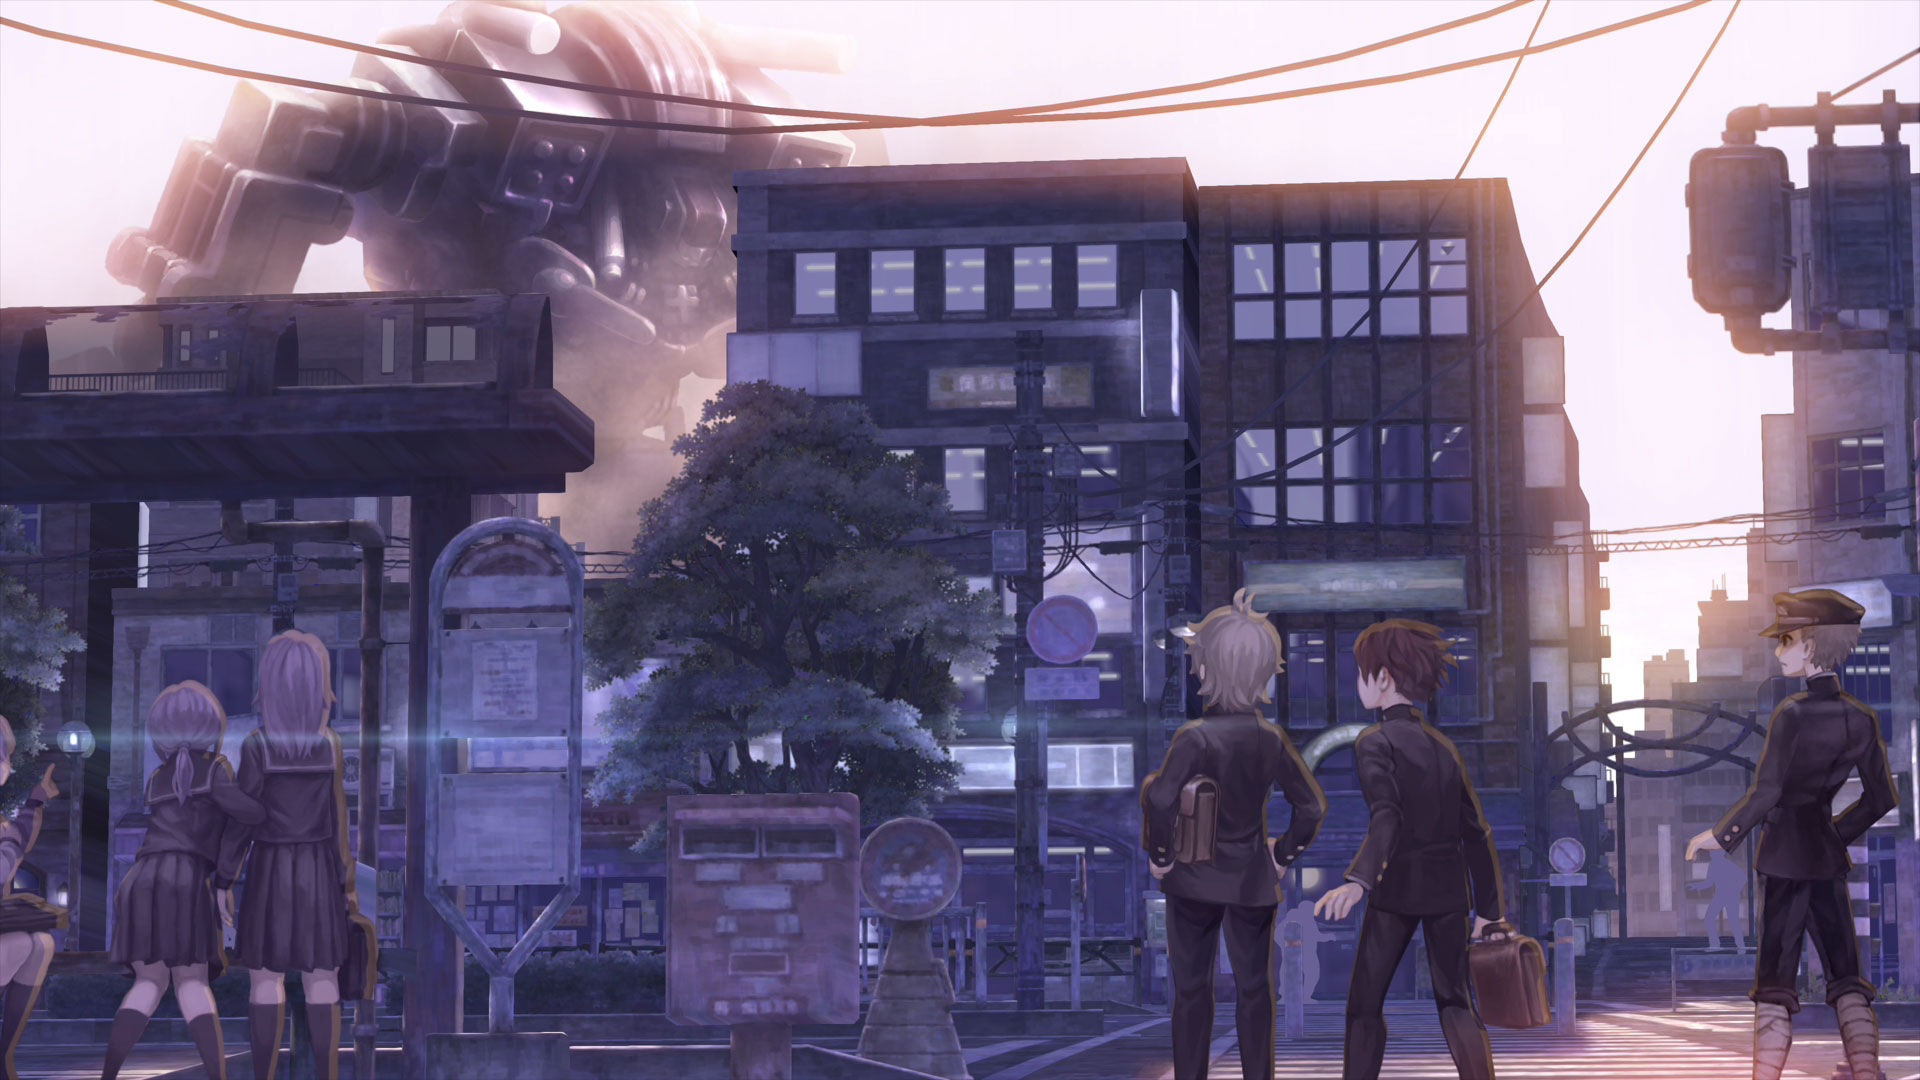 13 Sentinels: Aegis Rim Ships and Sells Over 400,000 Copies